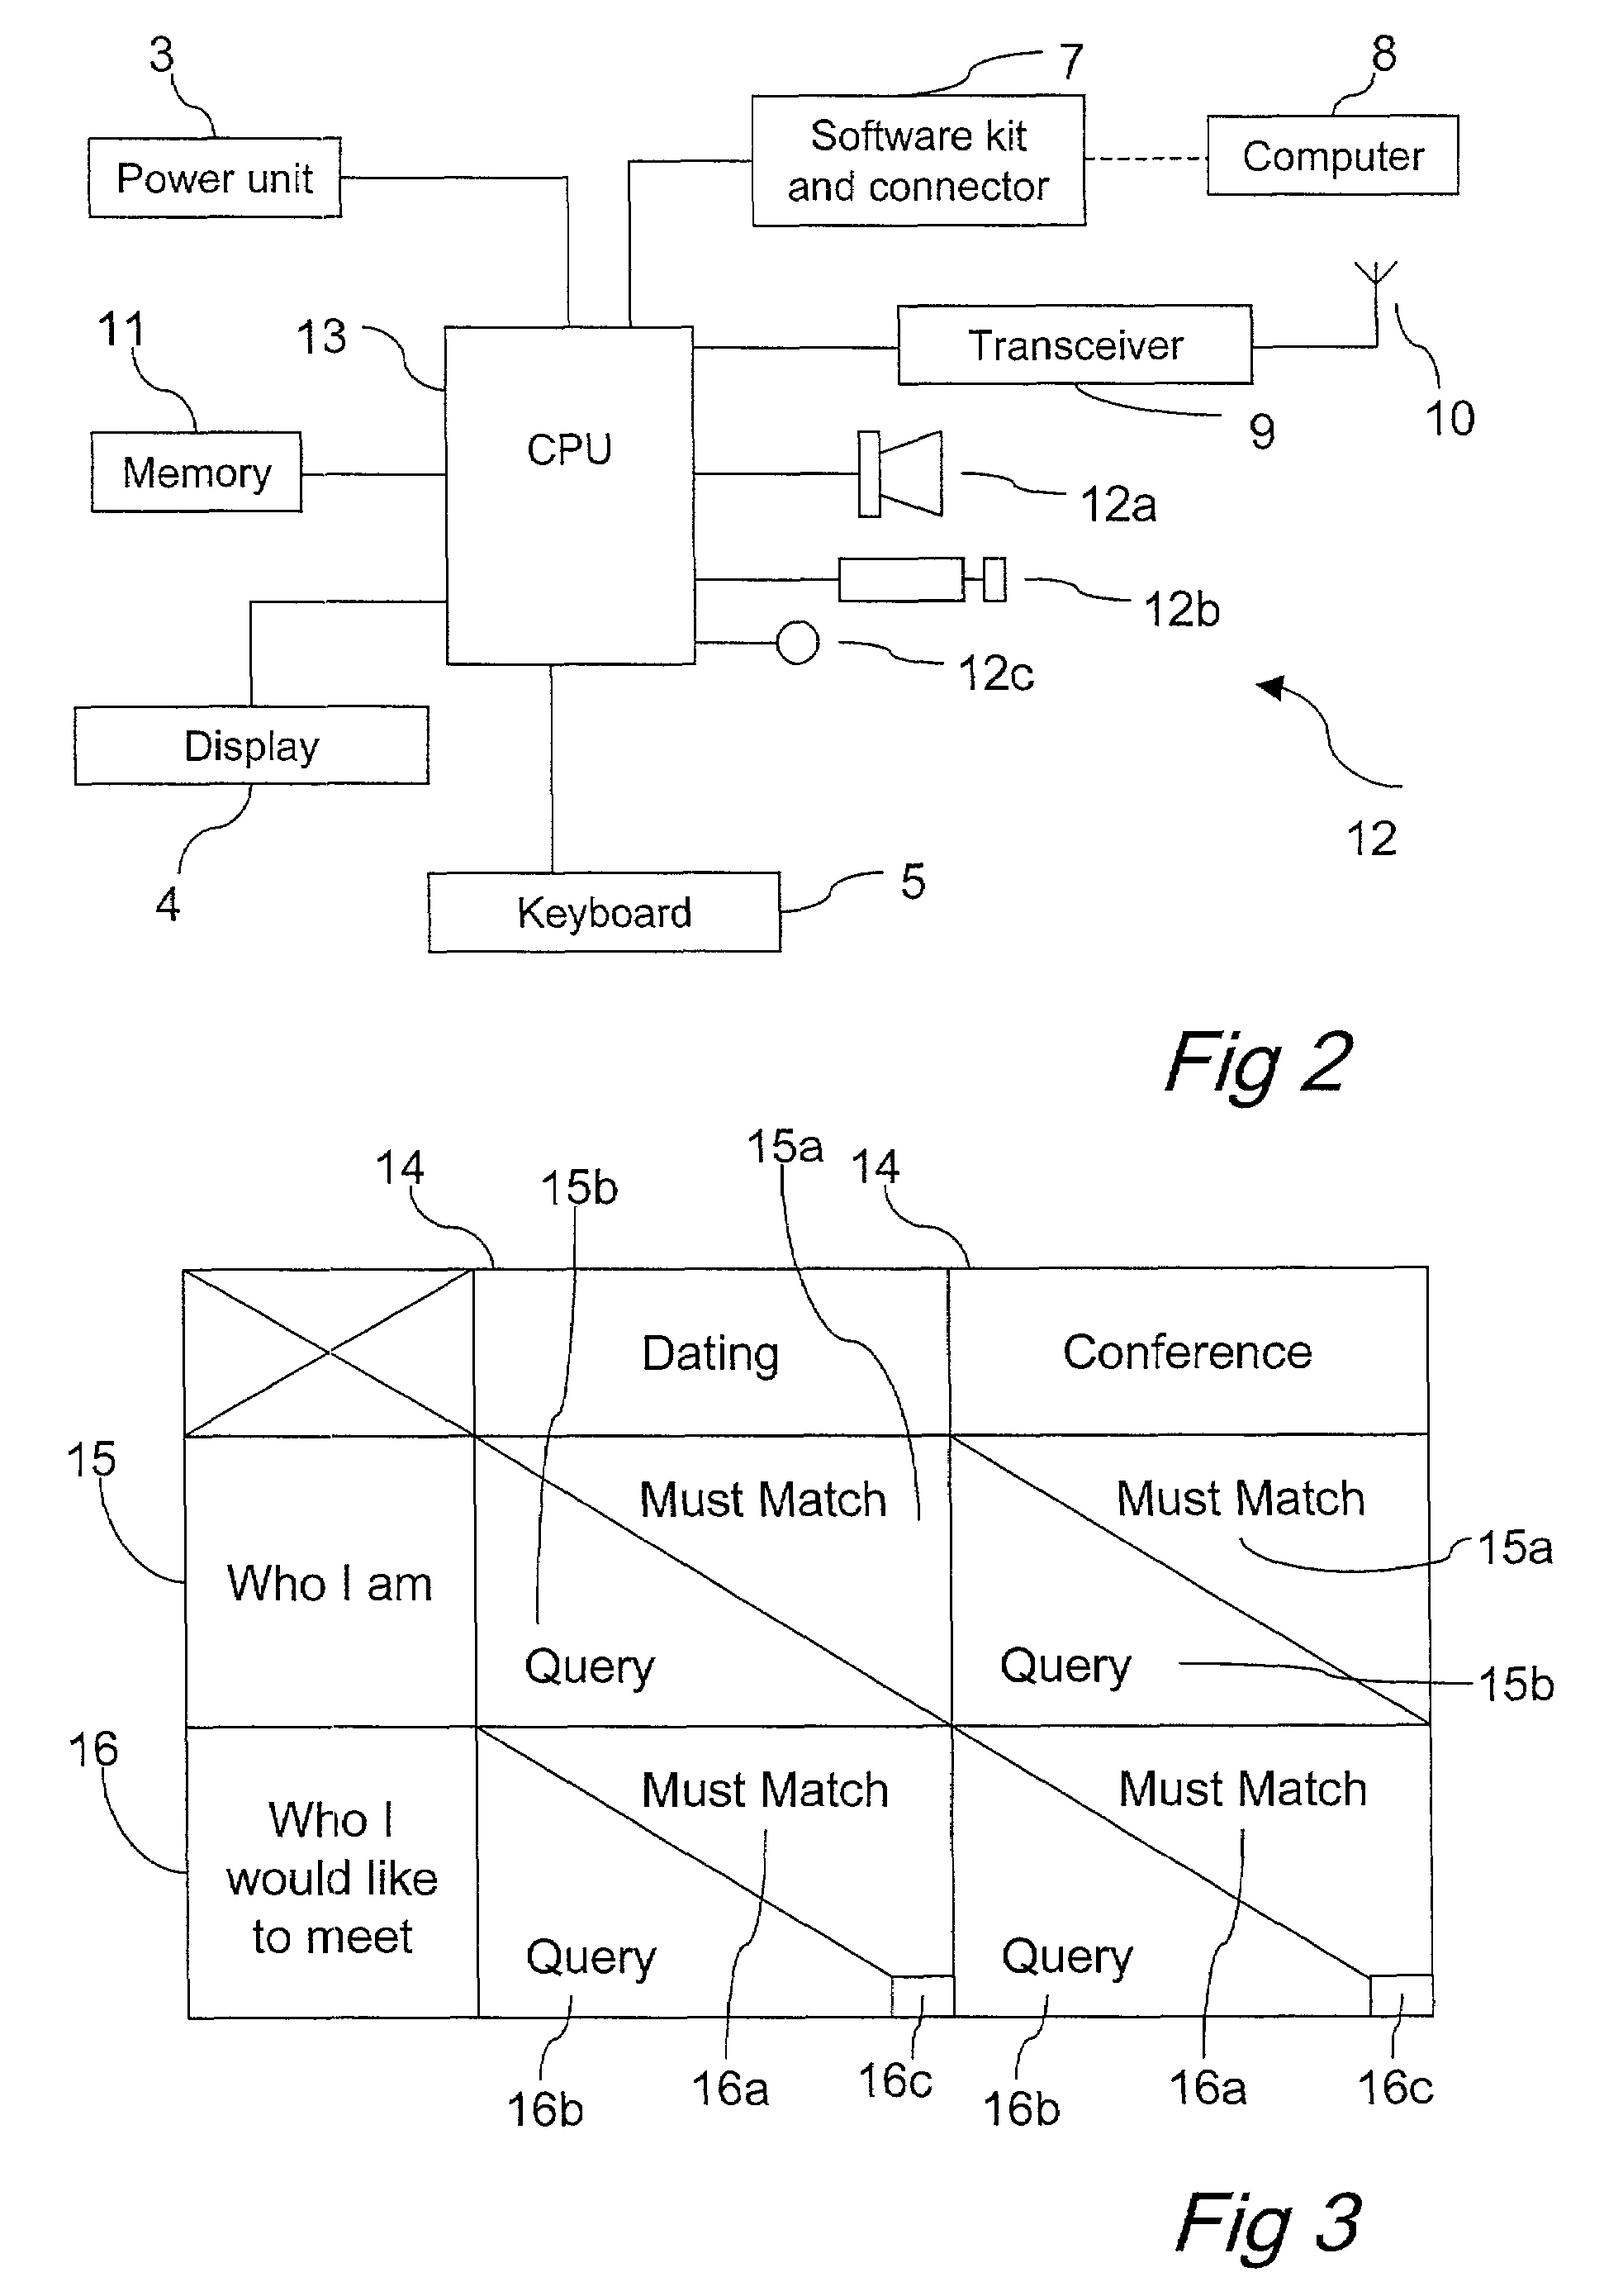 Data processing apparatus and method for correlation analysis